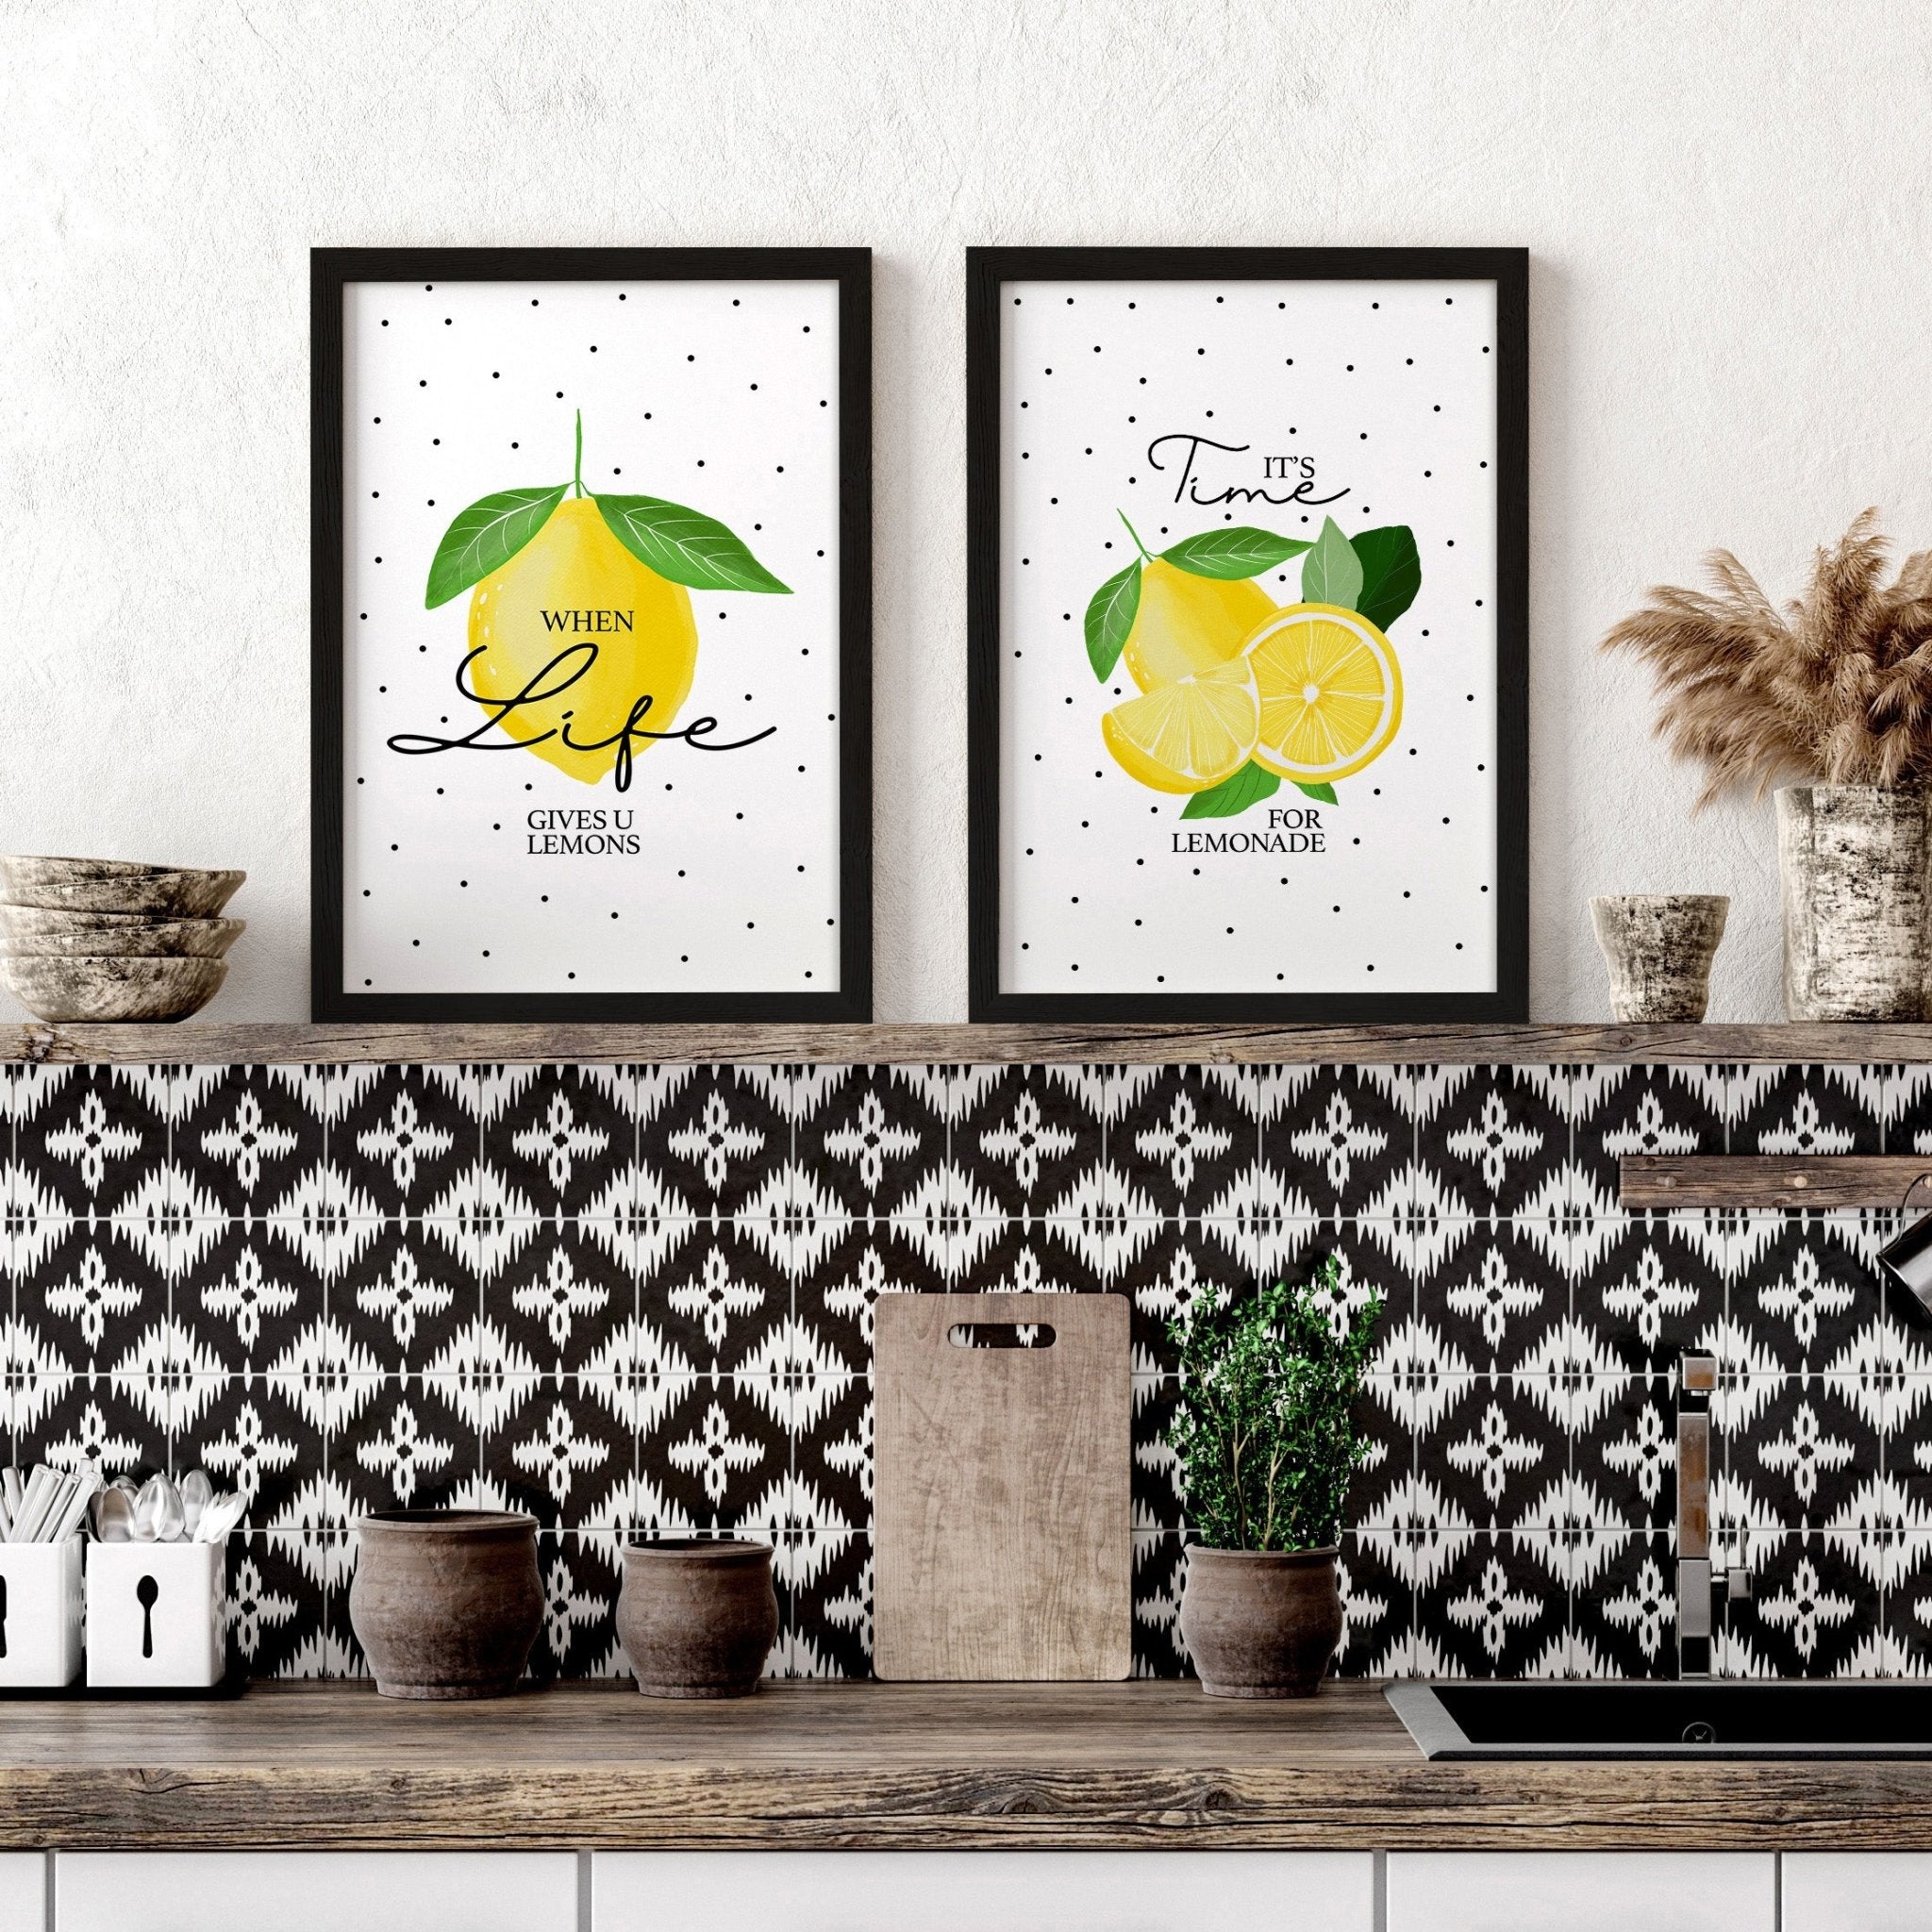 10 Creative Ideas for Adding Kitchen Wall Art - About Wall Art